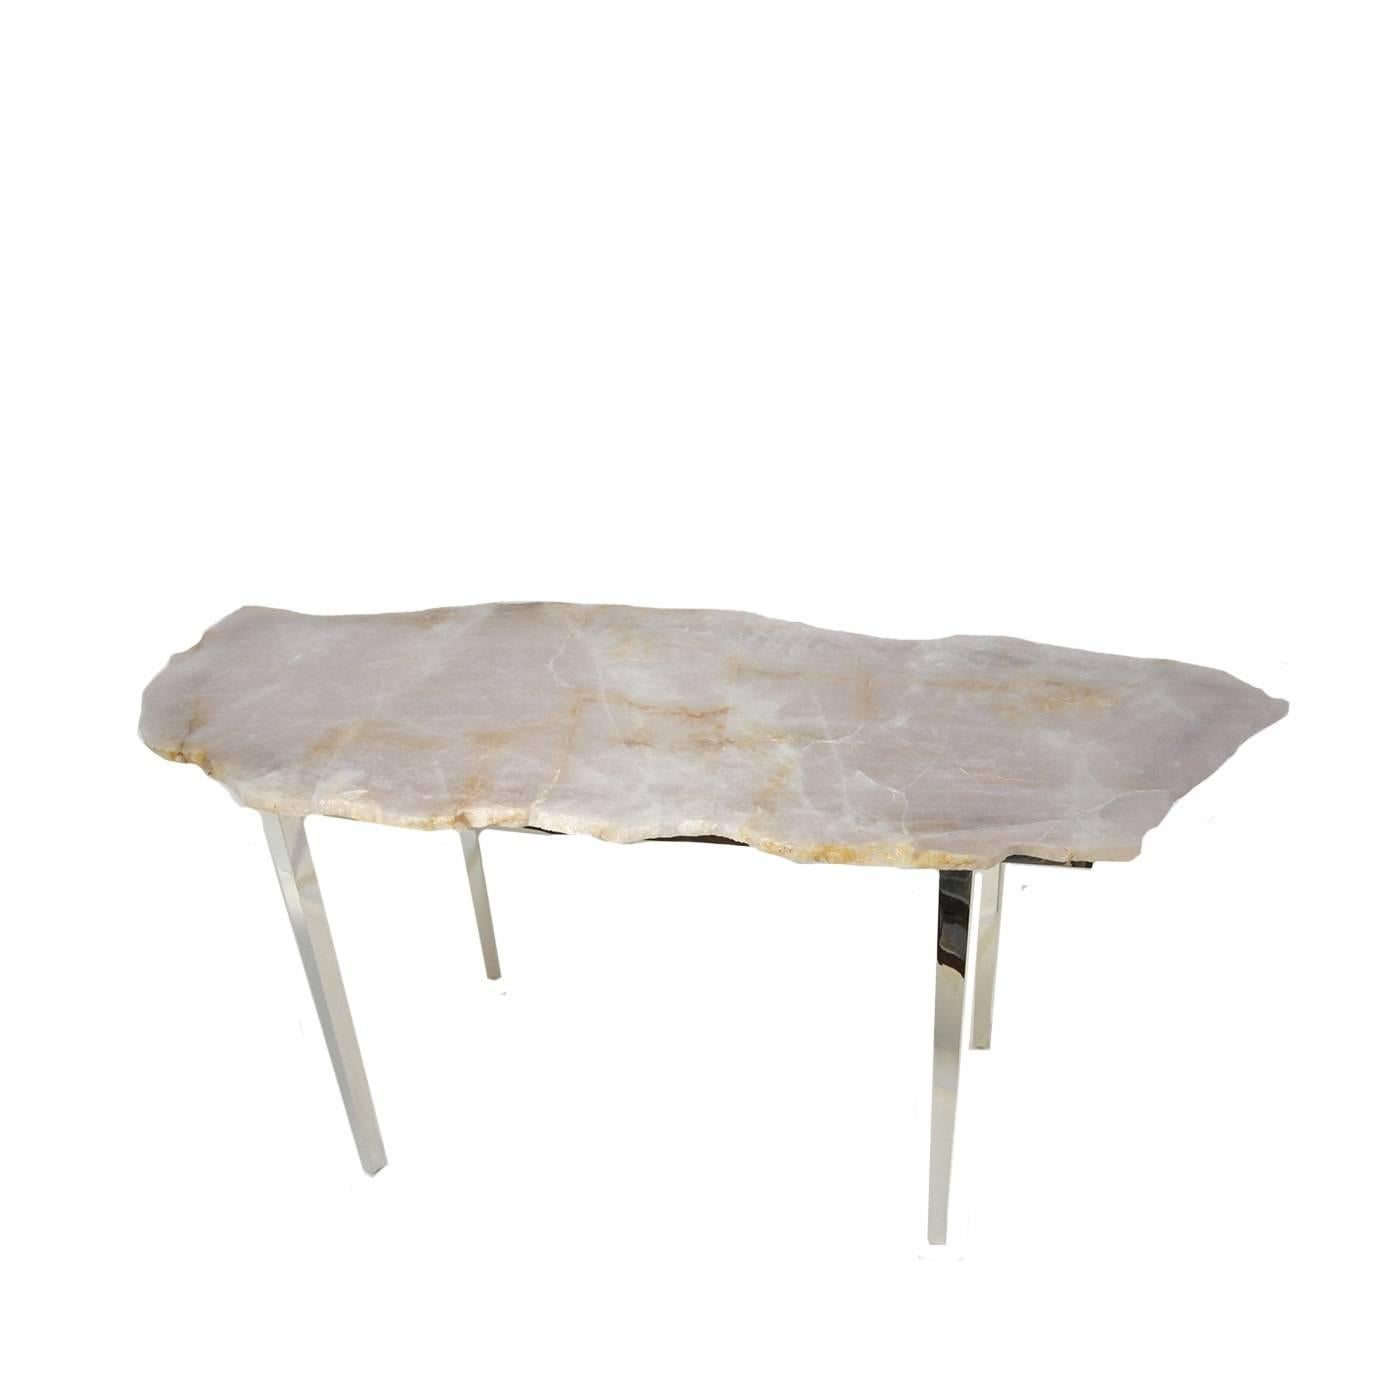 This coffee table features a large slab of handcut rose quartz from Madagascar. This breathtaking material features a variety of different inclusions throughout its natural surface, so that there will never be a dull moment as the eyes move all